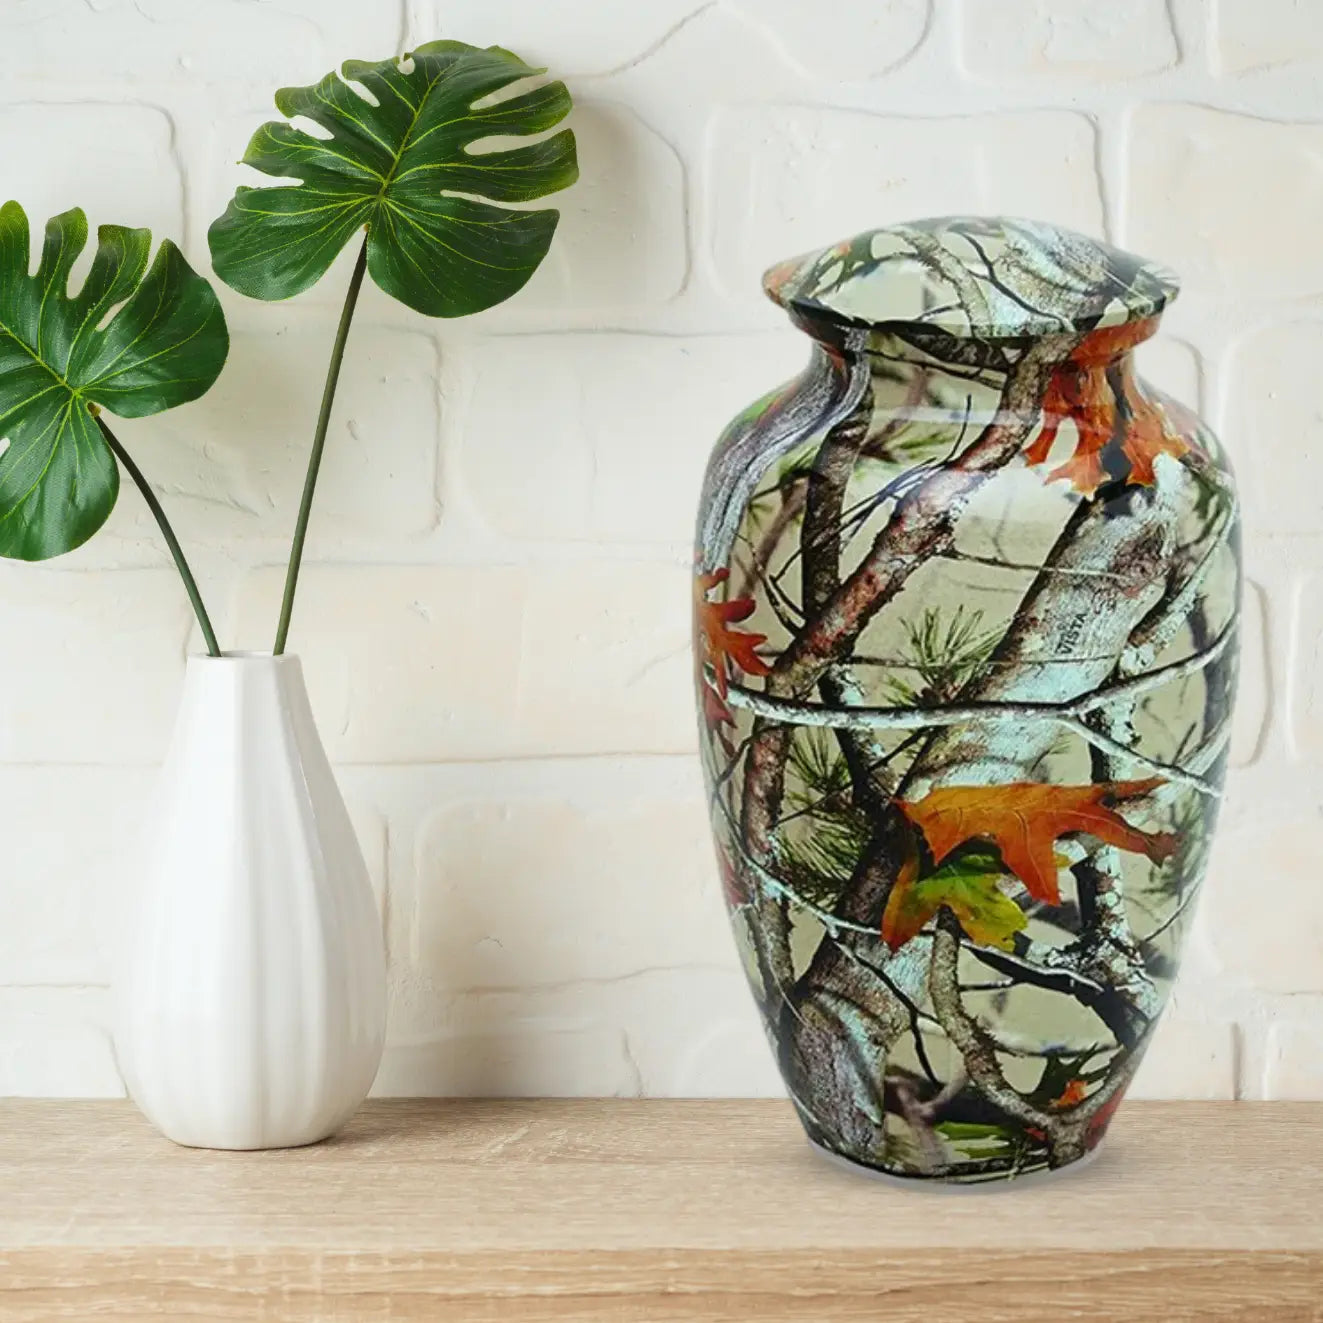 Hydro-Painted Pet Urns - Camouflage